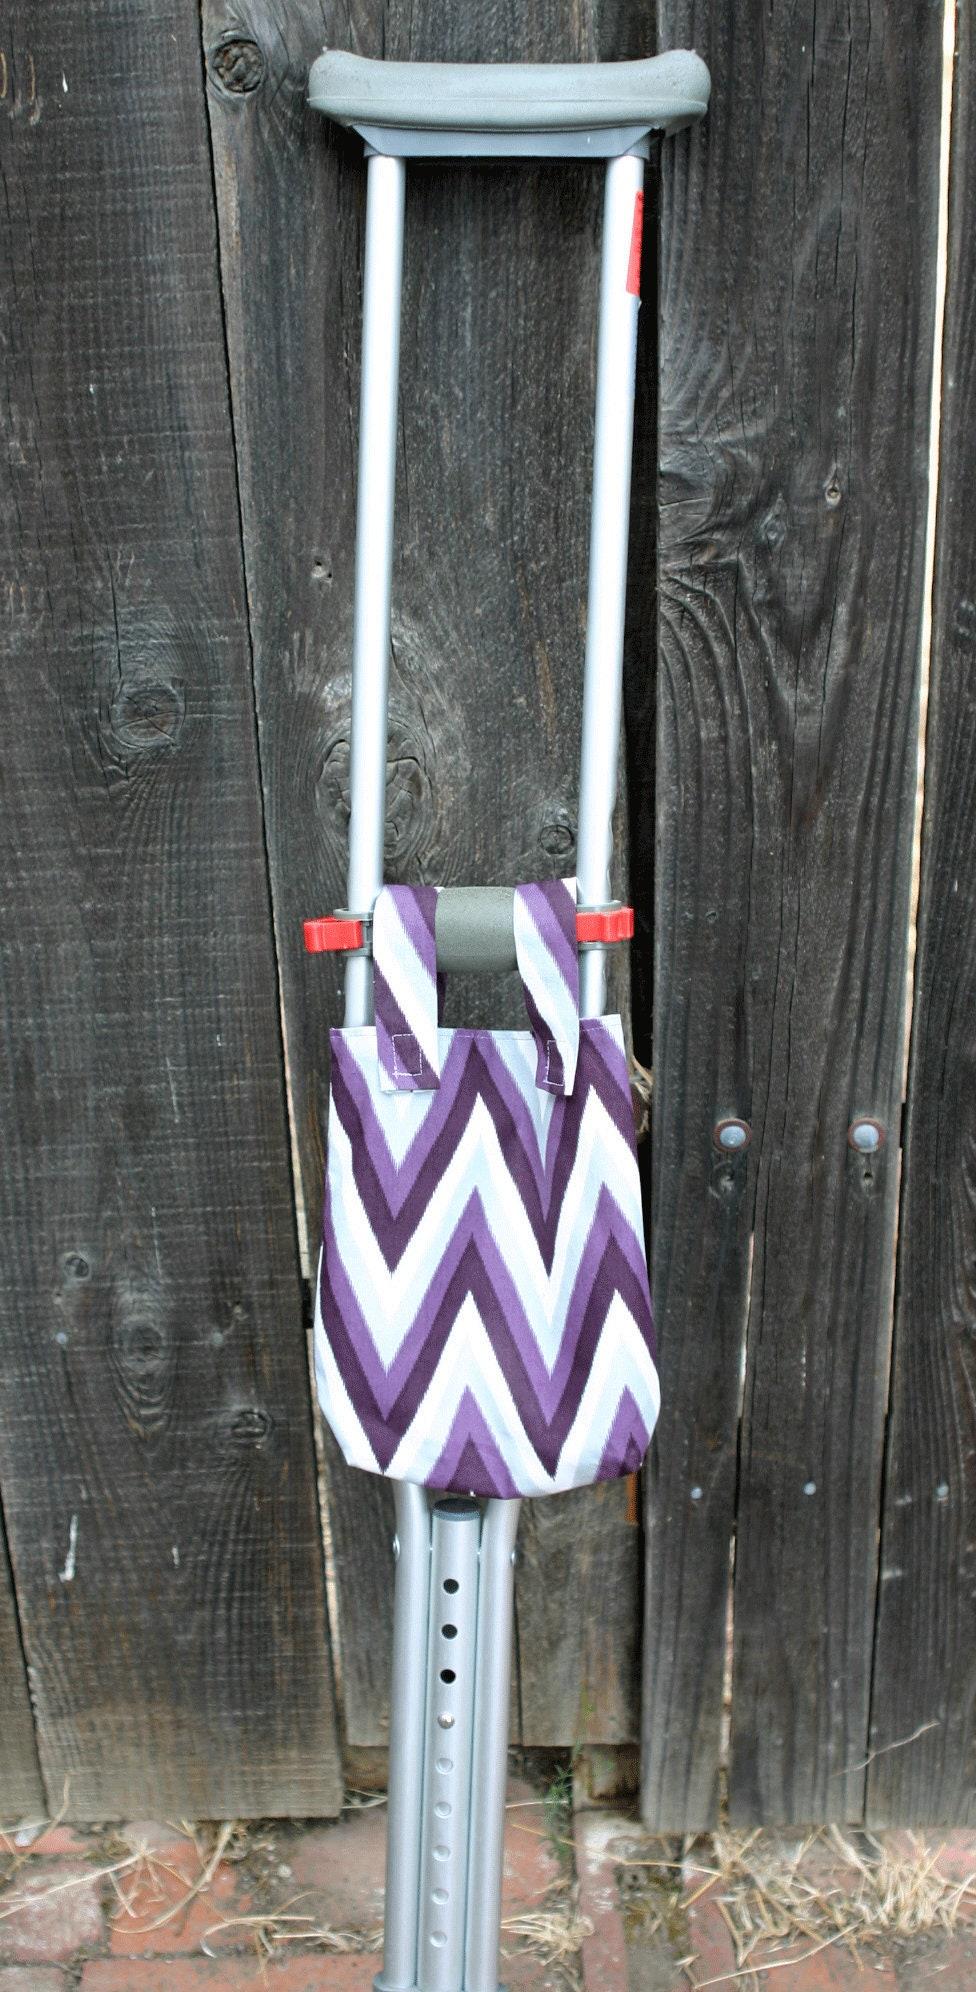 Example of similar bag used on a crutch